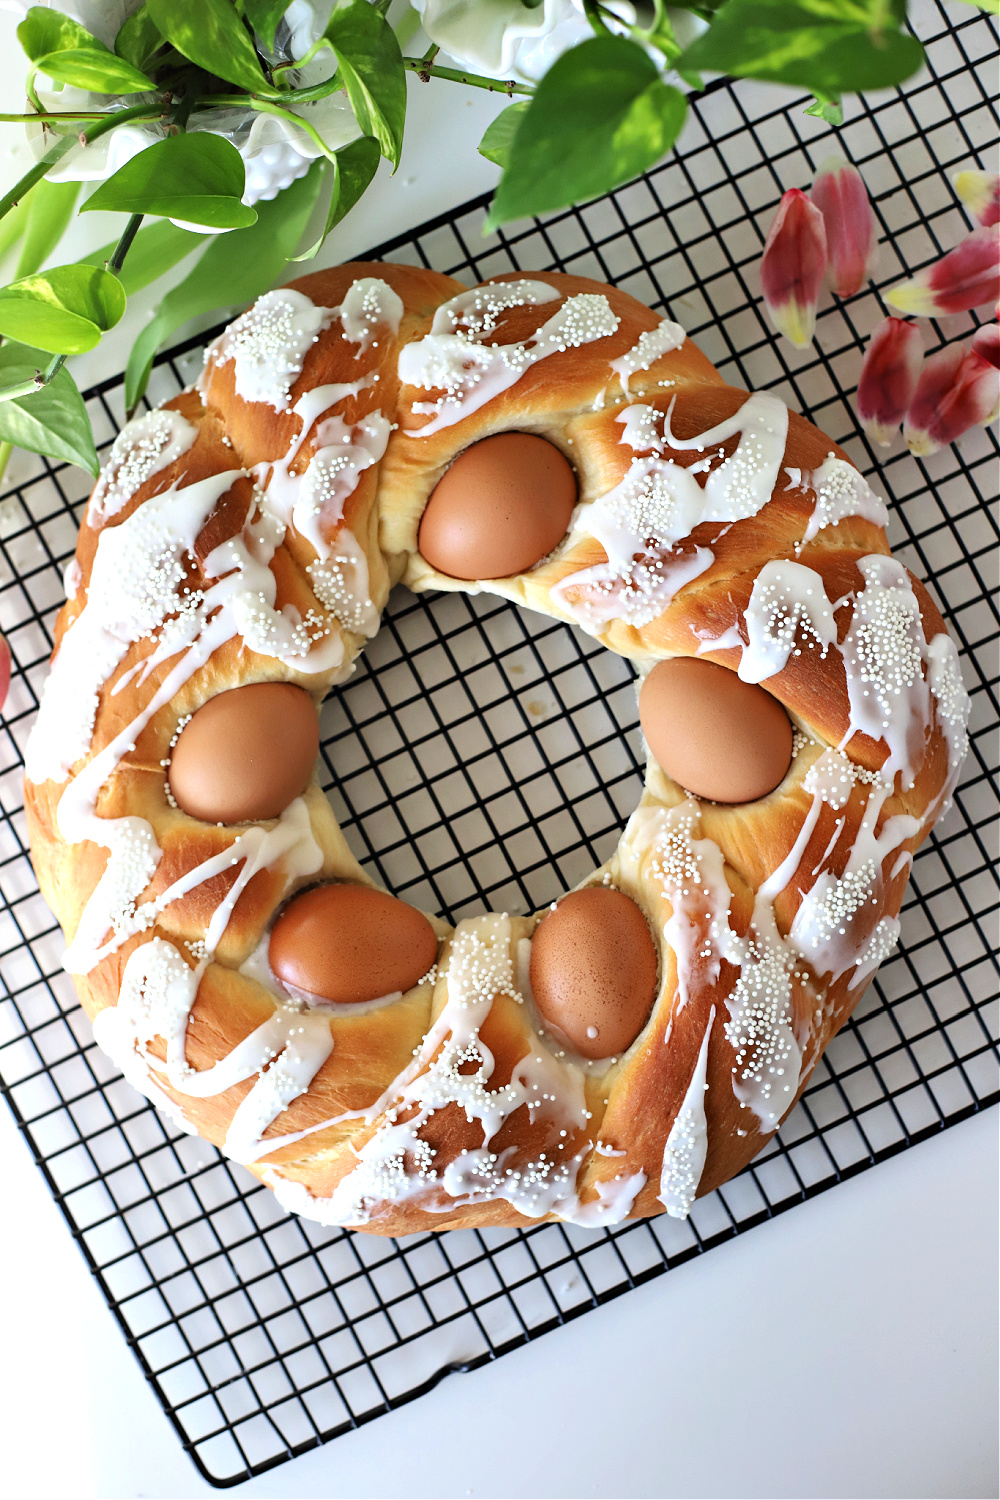 Using natural or dyed eggs you can make a beautiful sweet Easter bread. It is so easy especially when you let a bread machine do most of the work making the dough. An easy recipe for a lovely holiday breakfast.